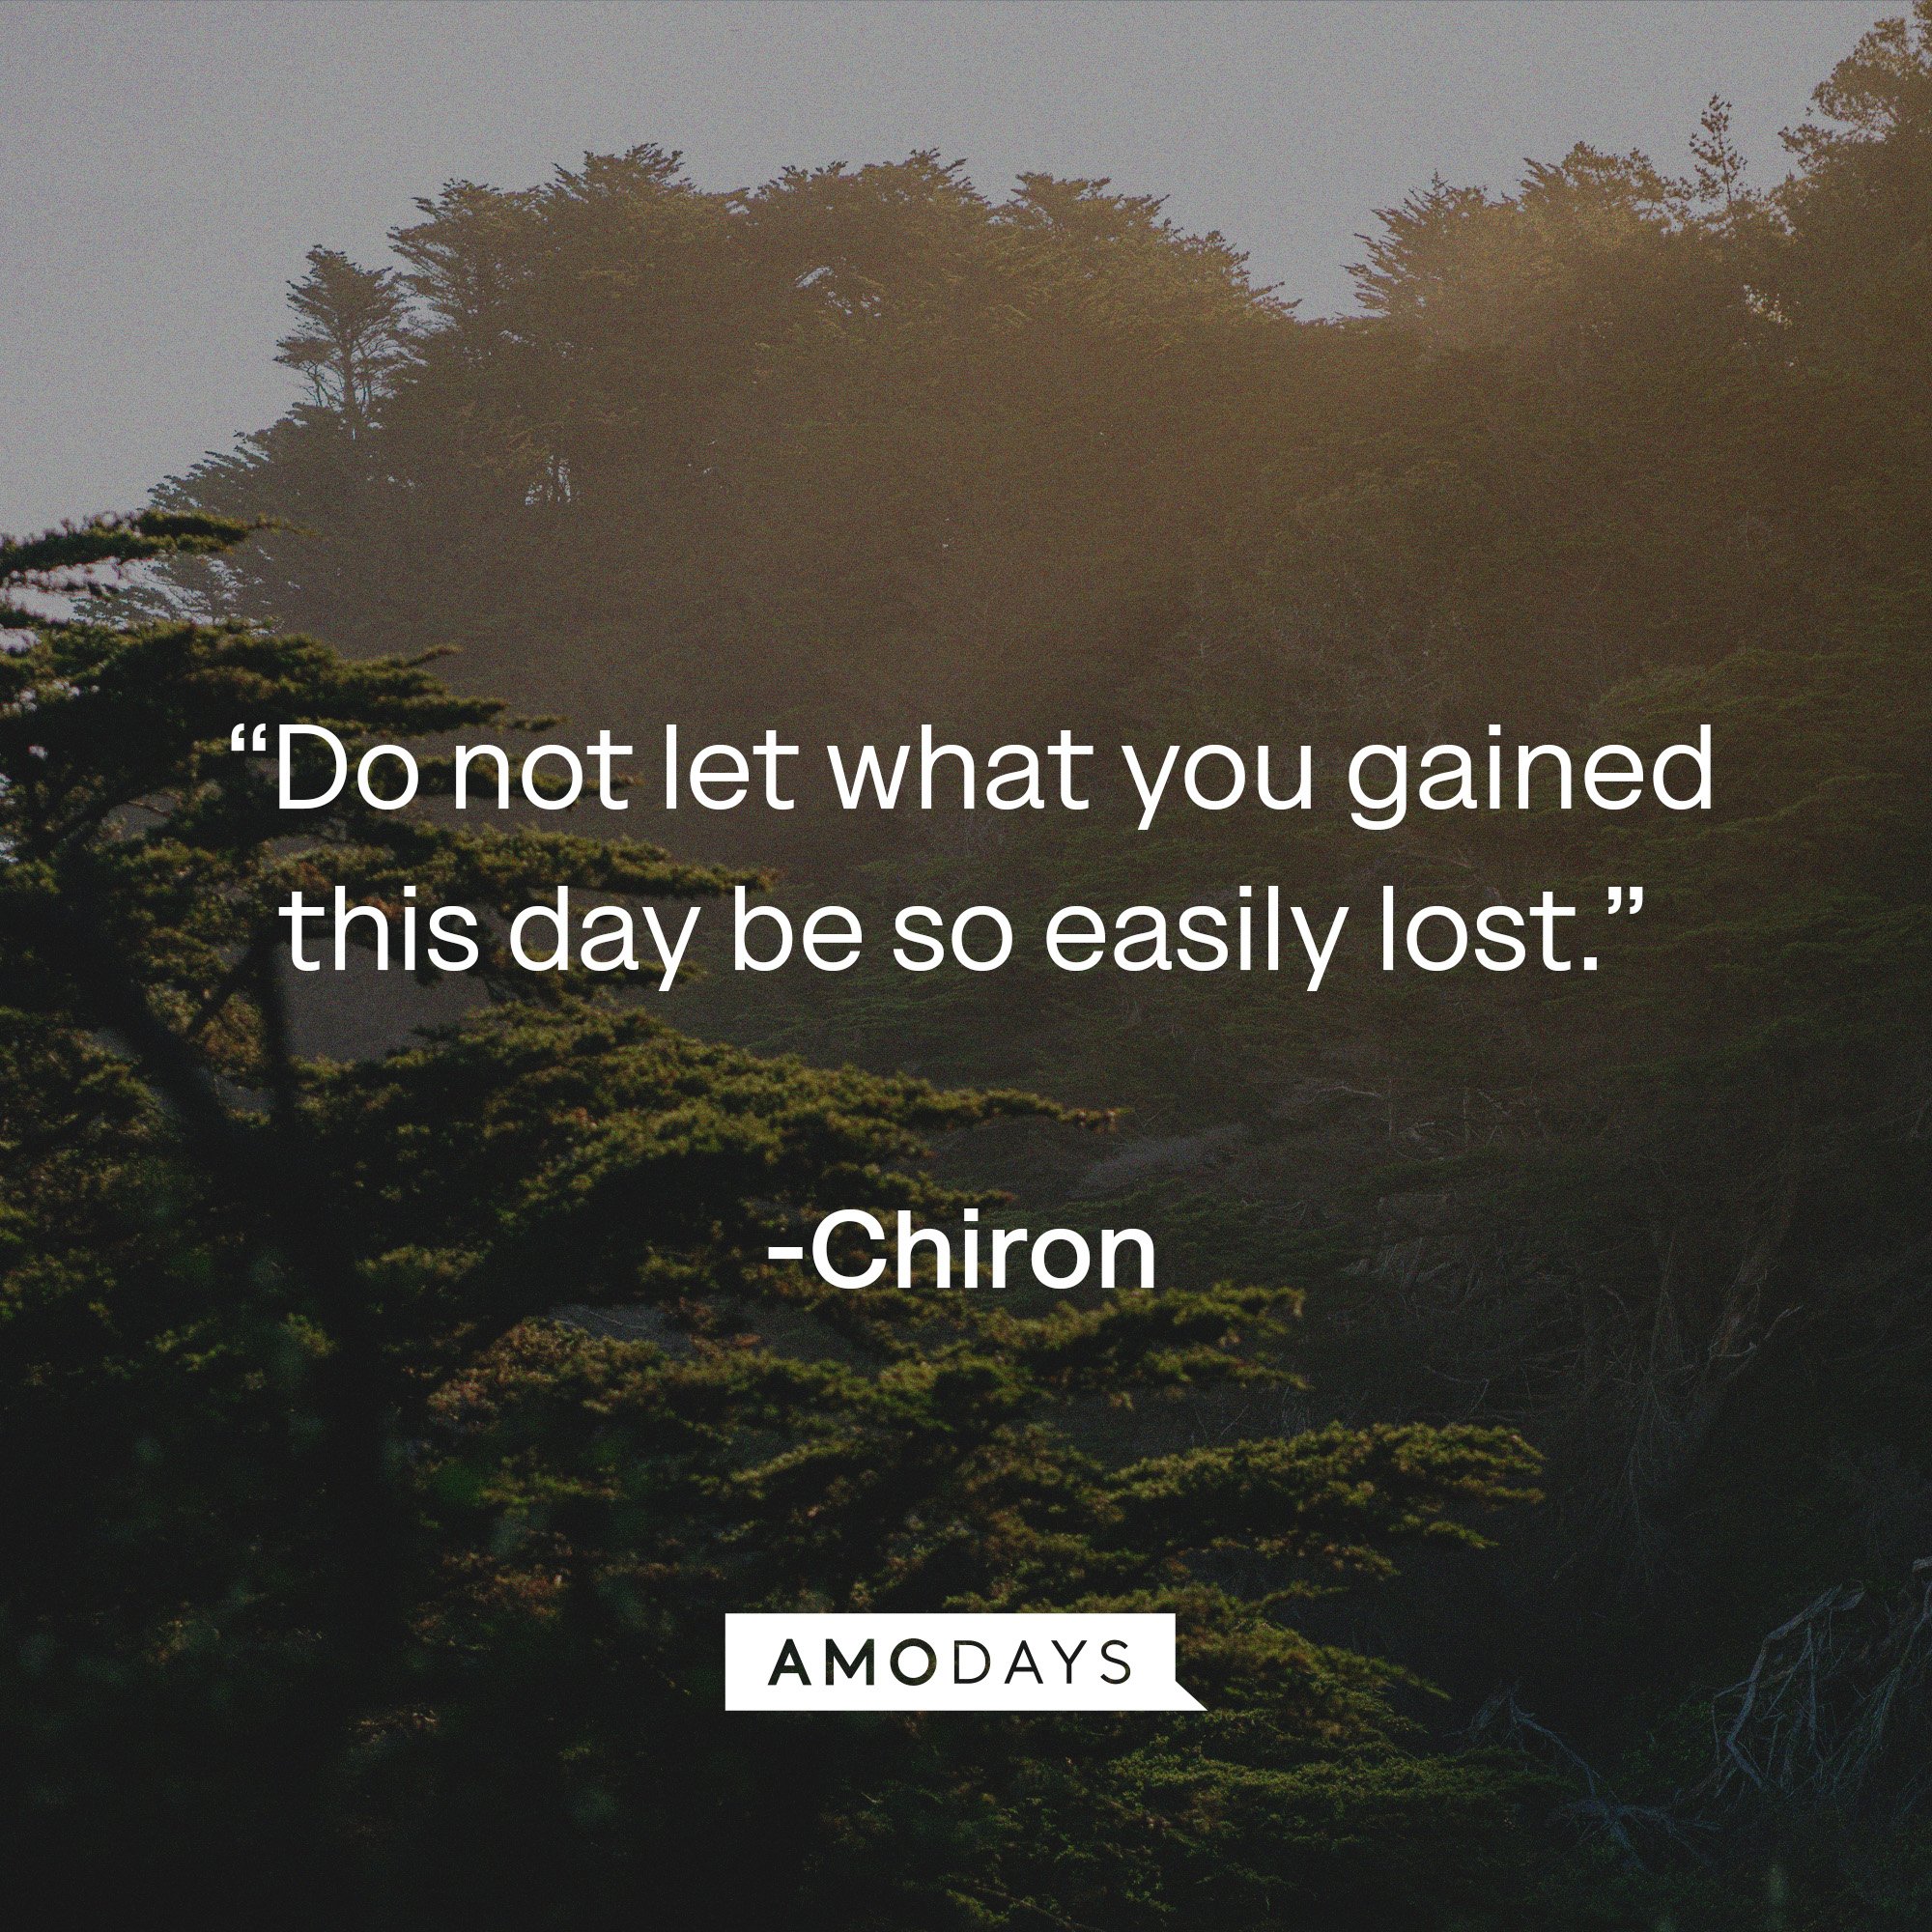  Chiron's quote: “Do not let what you gained this day be so easily lost.” | Image: AmoDays